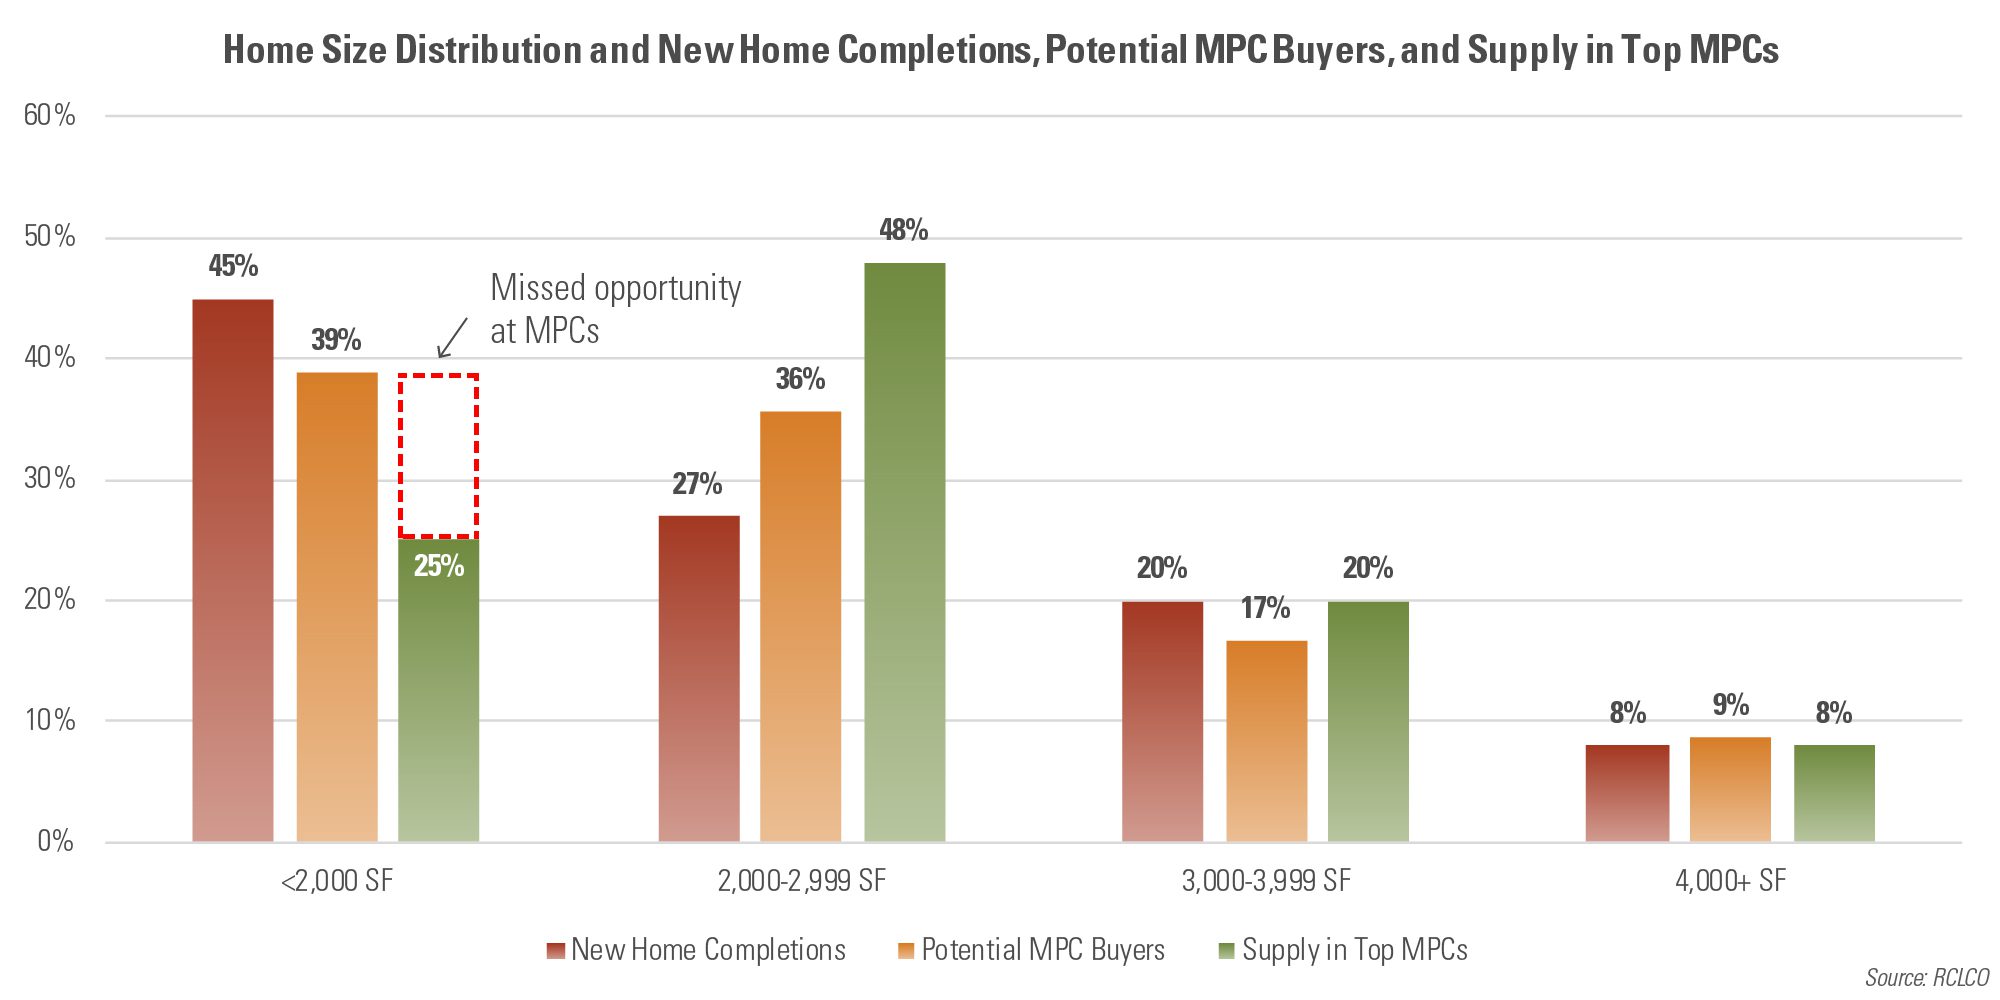 Home Size Distribution and New Home Completions, Potential MPC Buyers, and Supply in Top MPCs